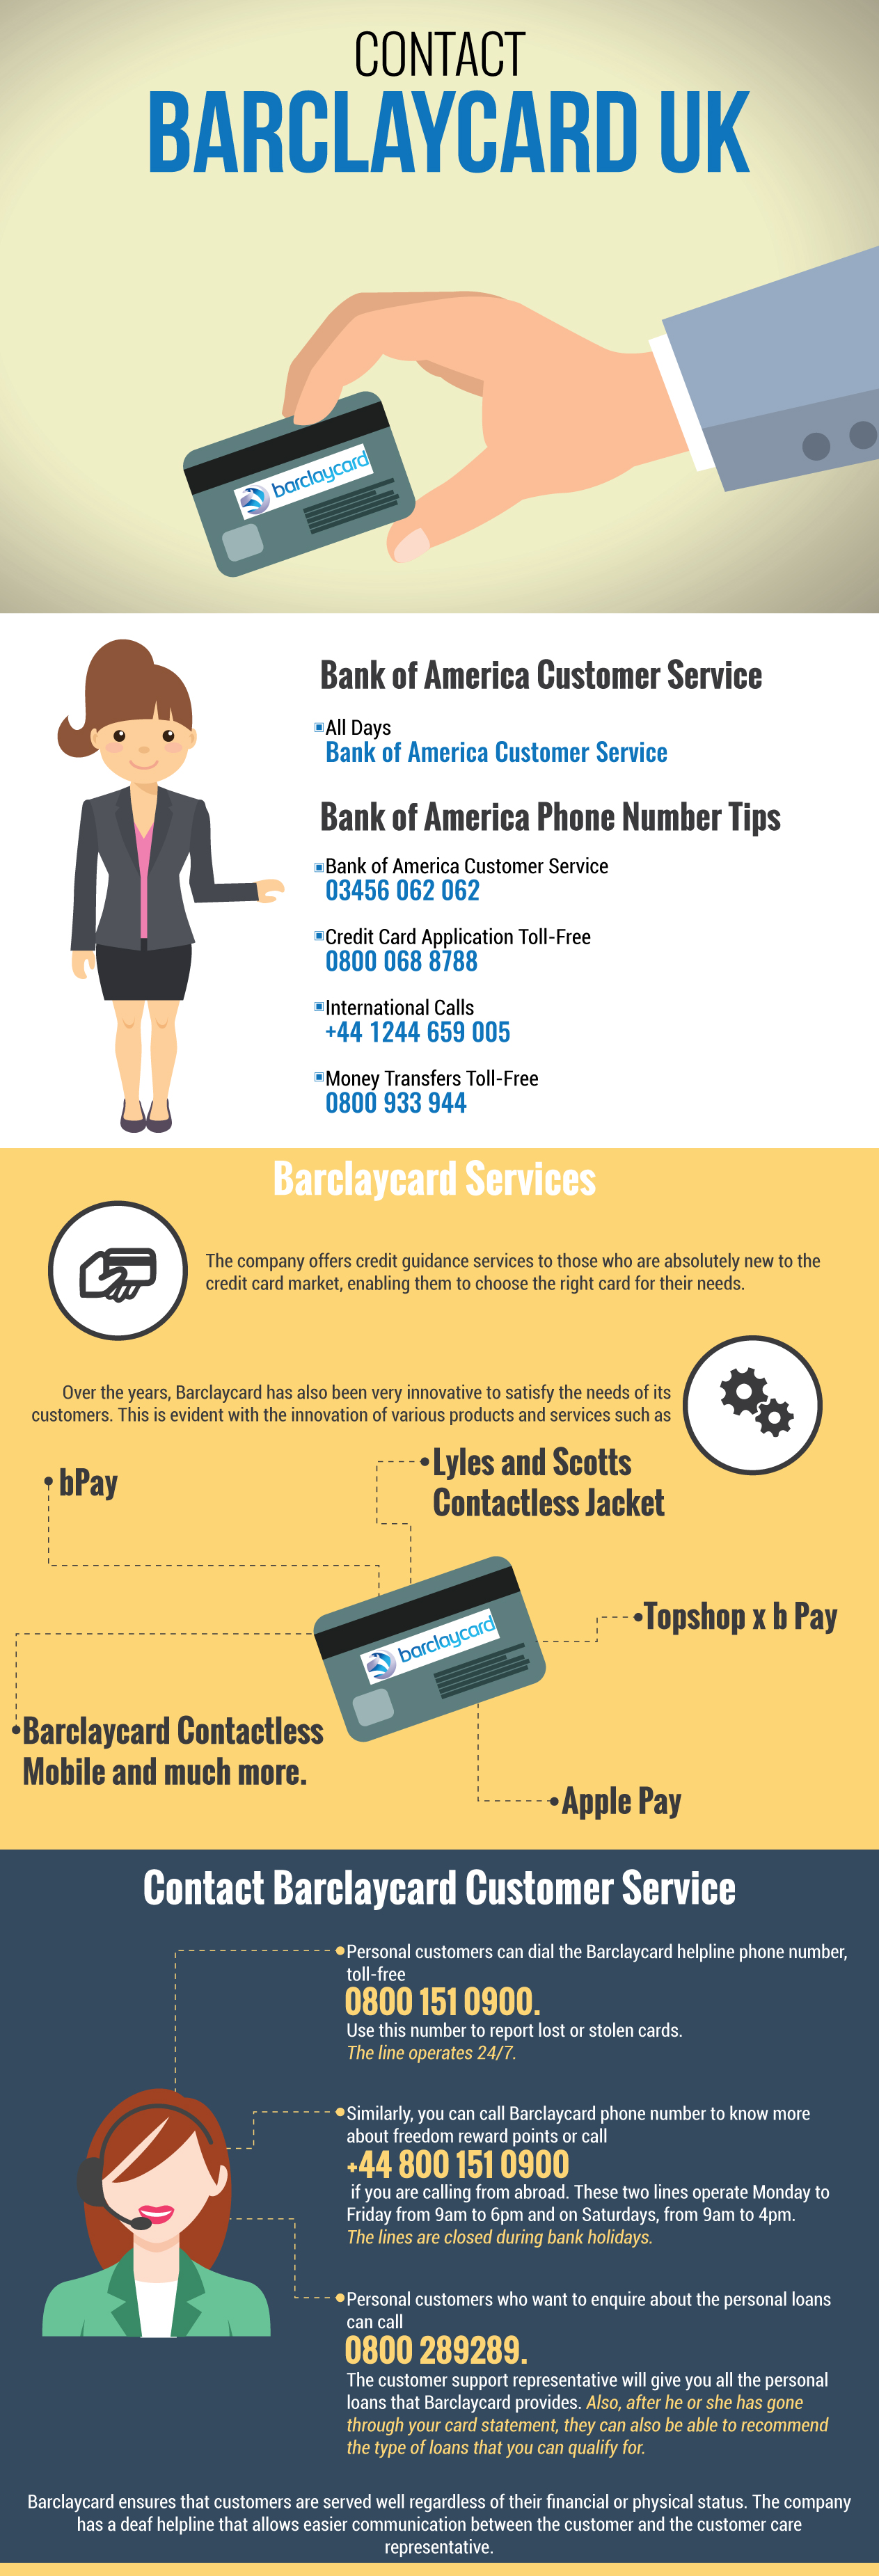 Barclaycard Contact Phone Number